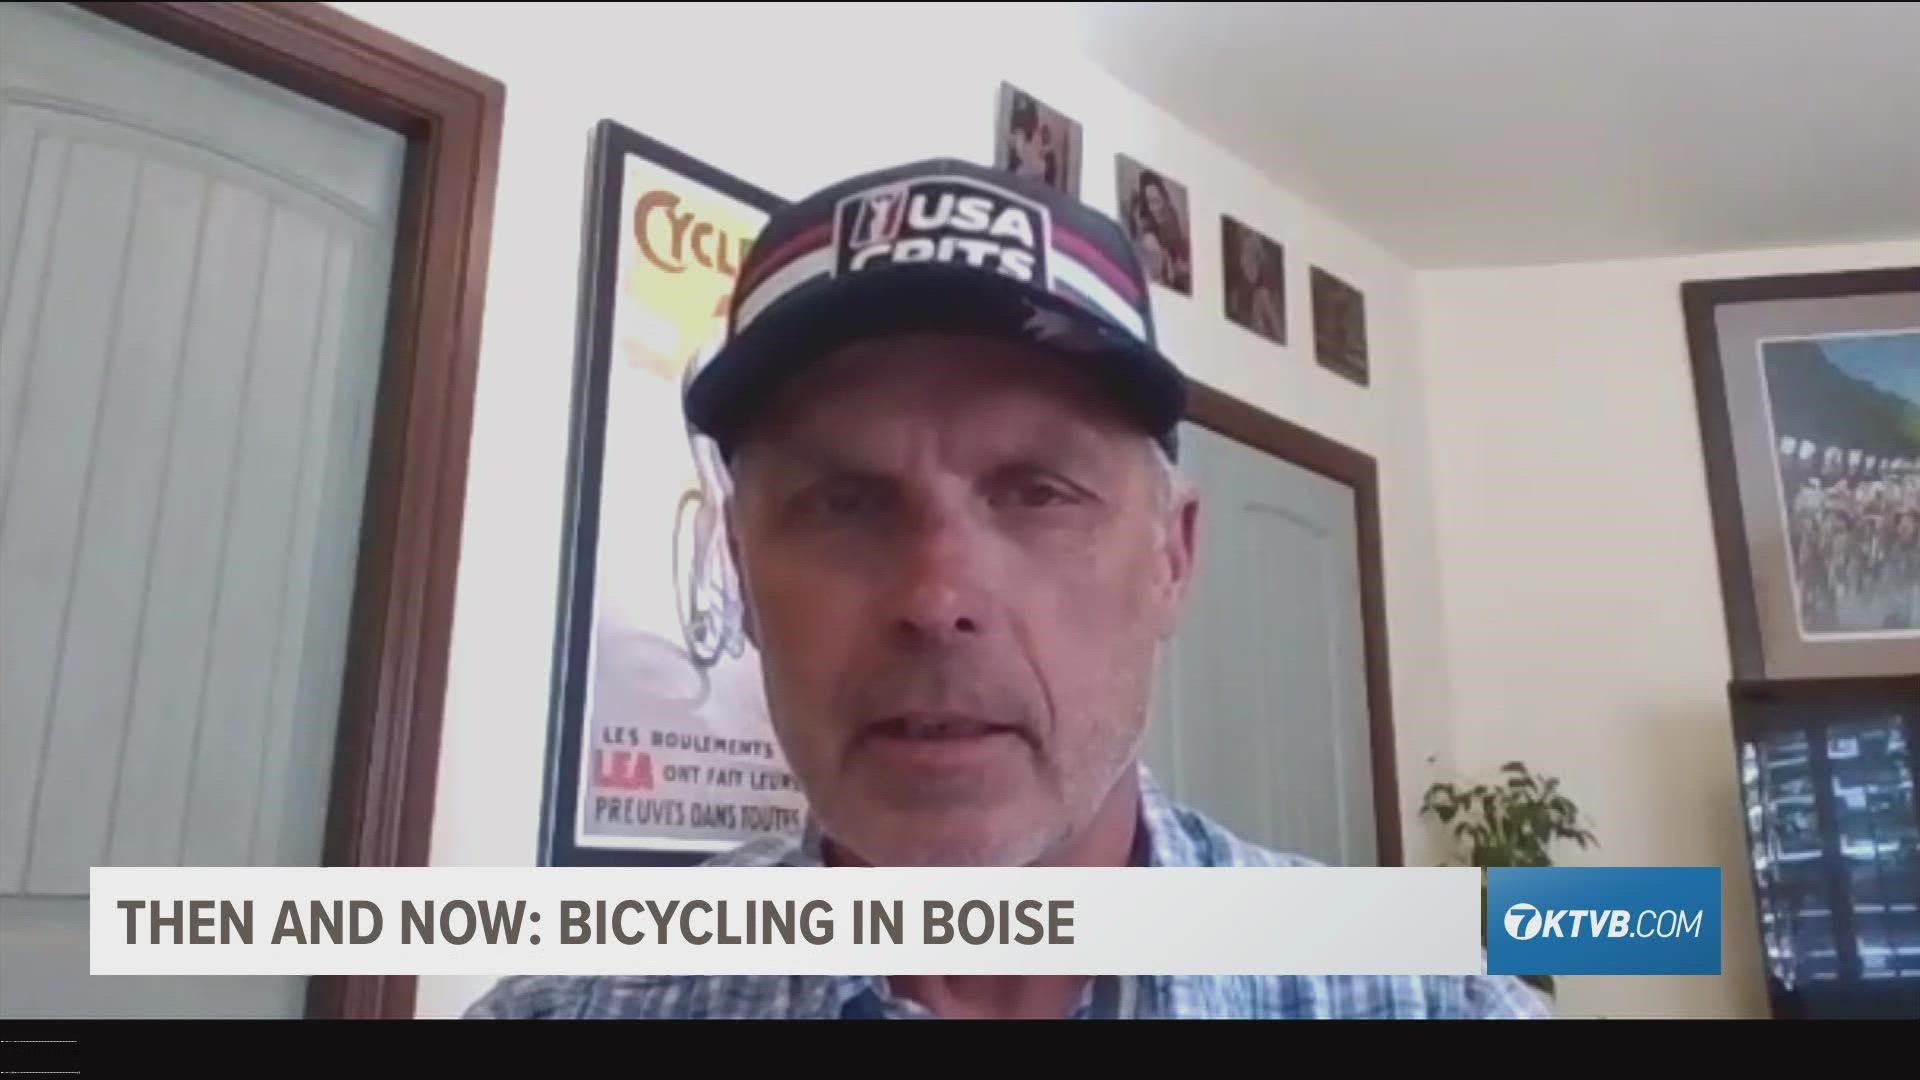 Boise has become of the Northwest's top cycling communities. It's an achievement that has taken decades and a lot of dedication.